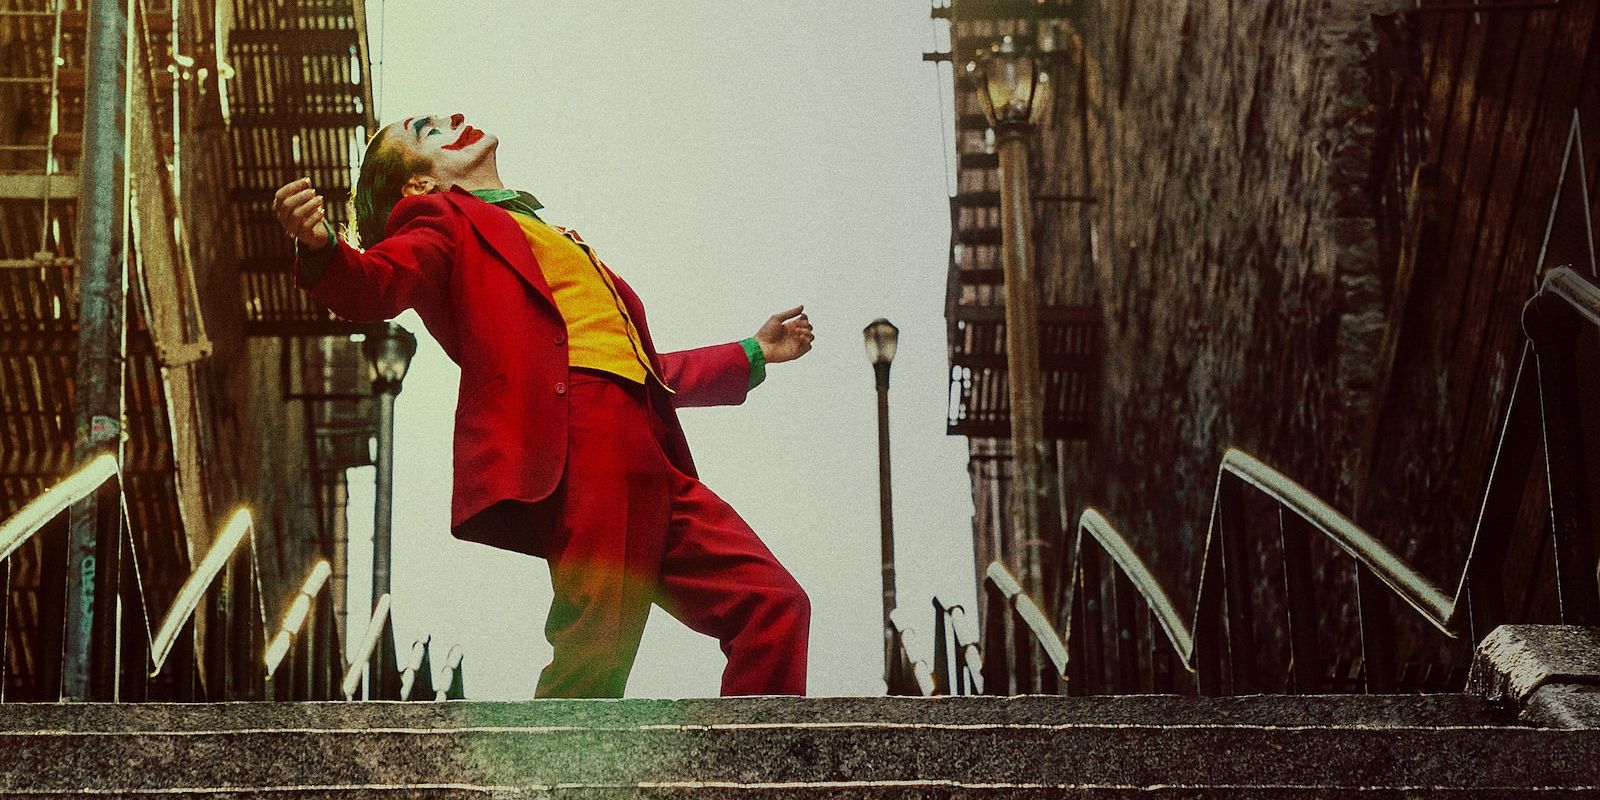 A closeup of the Joker movie poster, showing the titular character dancing in the street